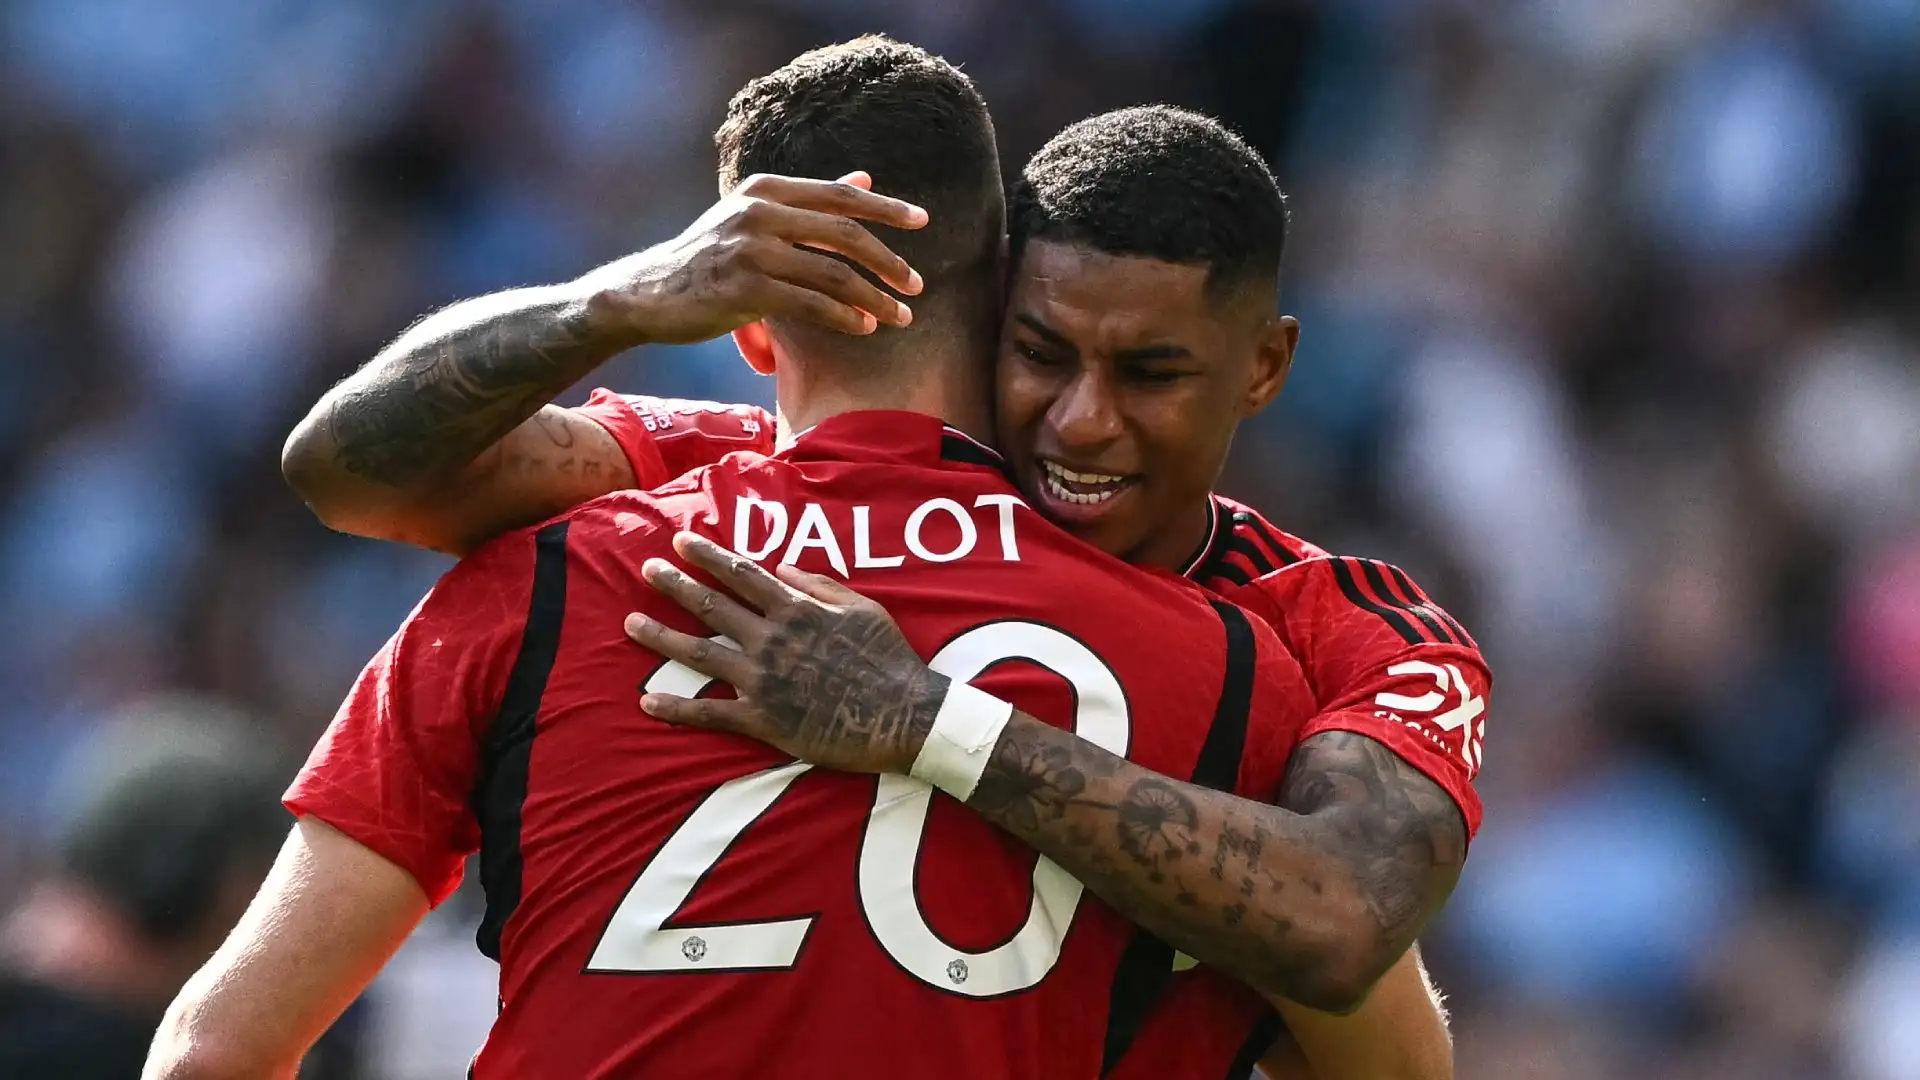 Marcus Rashford announces social media hiatus to 'reset mentally after challenging season' amid uncertainty over Man Utd future and omission from England's Euro 2024 squad